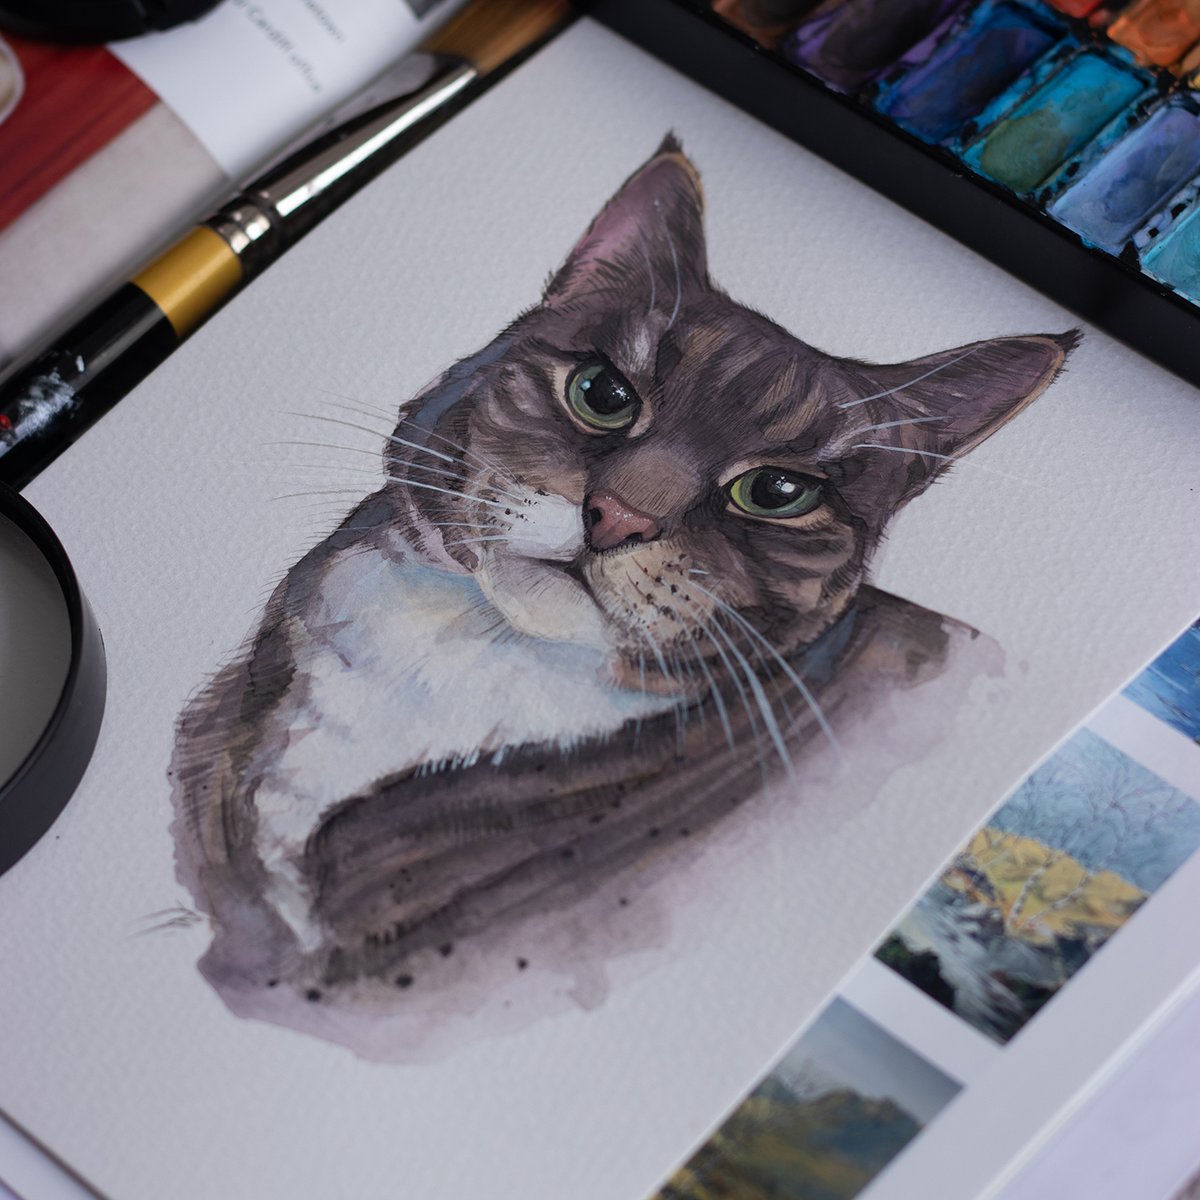 Gorgeous Amber 💔
The first custom-made watercolor pet went to its owner. 
Thank you and safe travel!💌
etsy.com/shop/TendaLeeA…
#petportraits #cat #dog #commisions #potraits #pets #ArtistOnTwitter #EtsySeller #etsyart #gift #UK #Cardiff